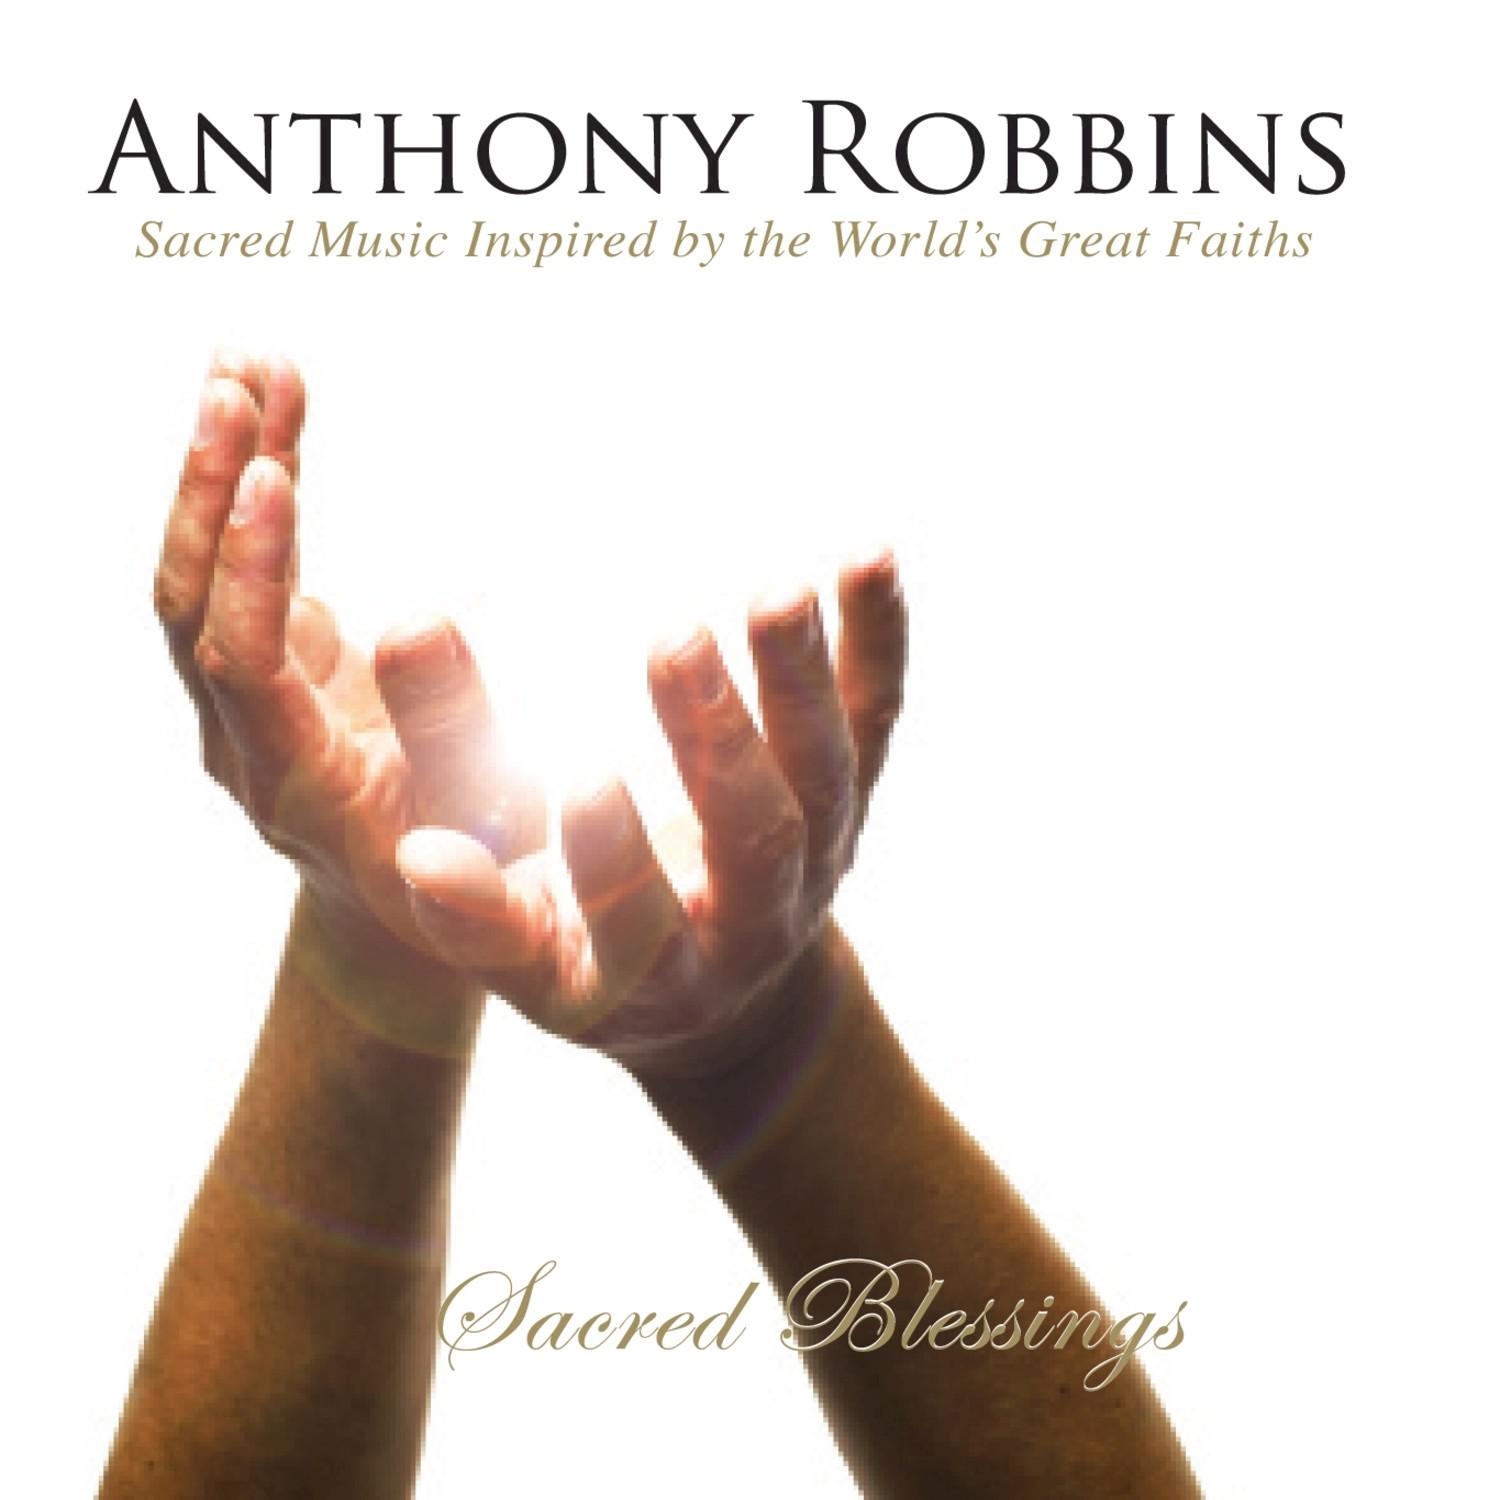 Introduction by Anthony Robbins